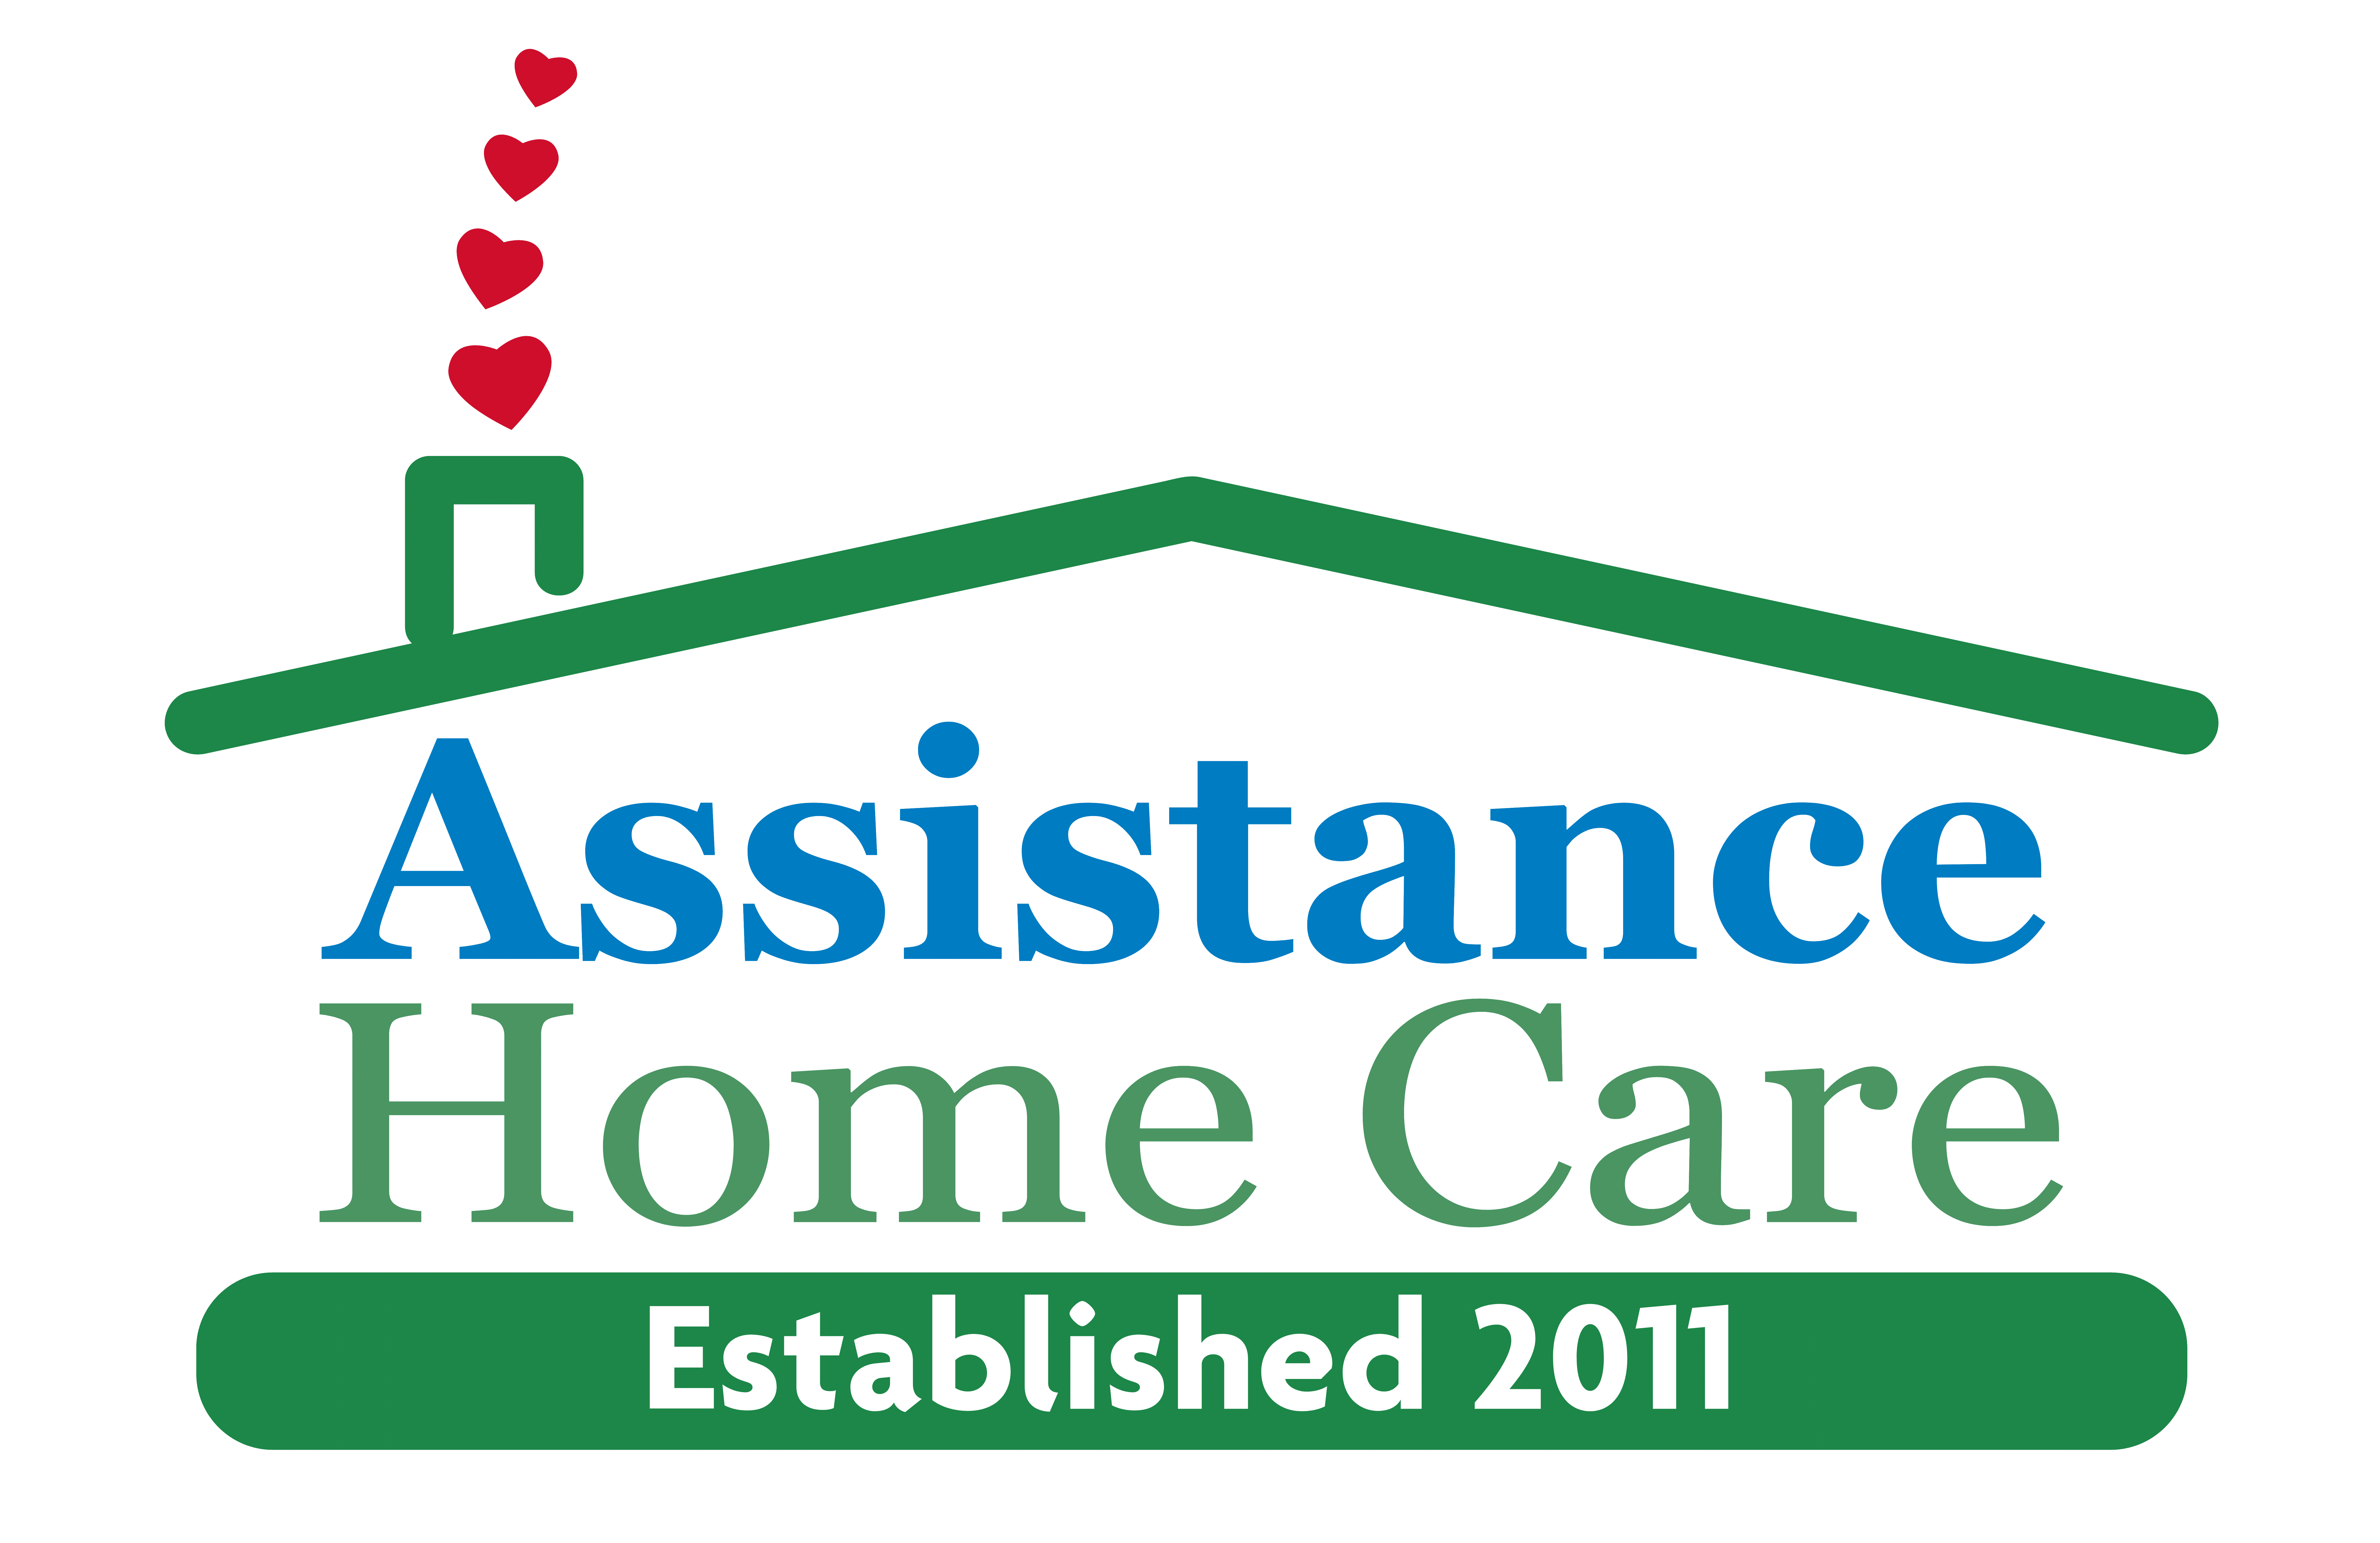 silver - Assistance Home Care Logo.